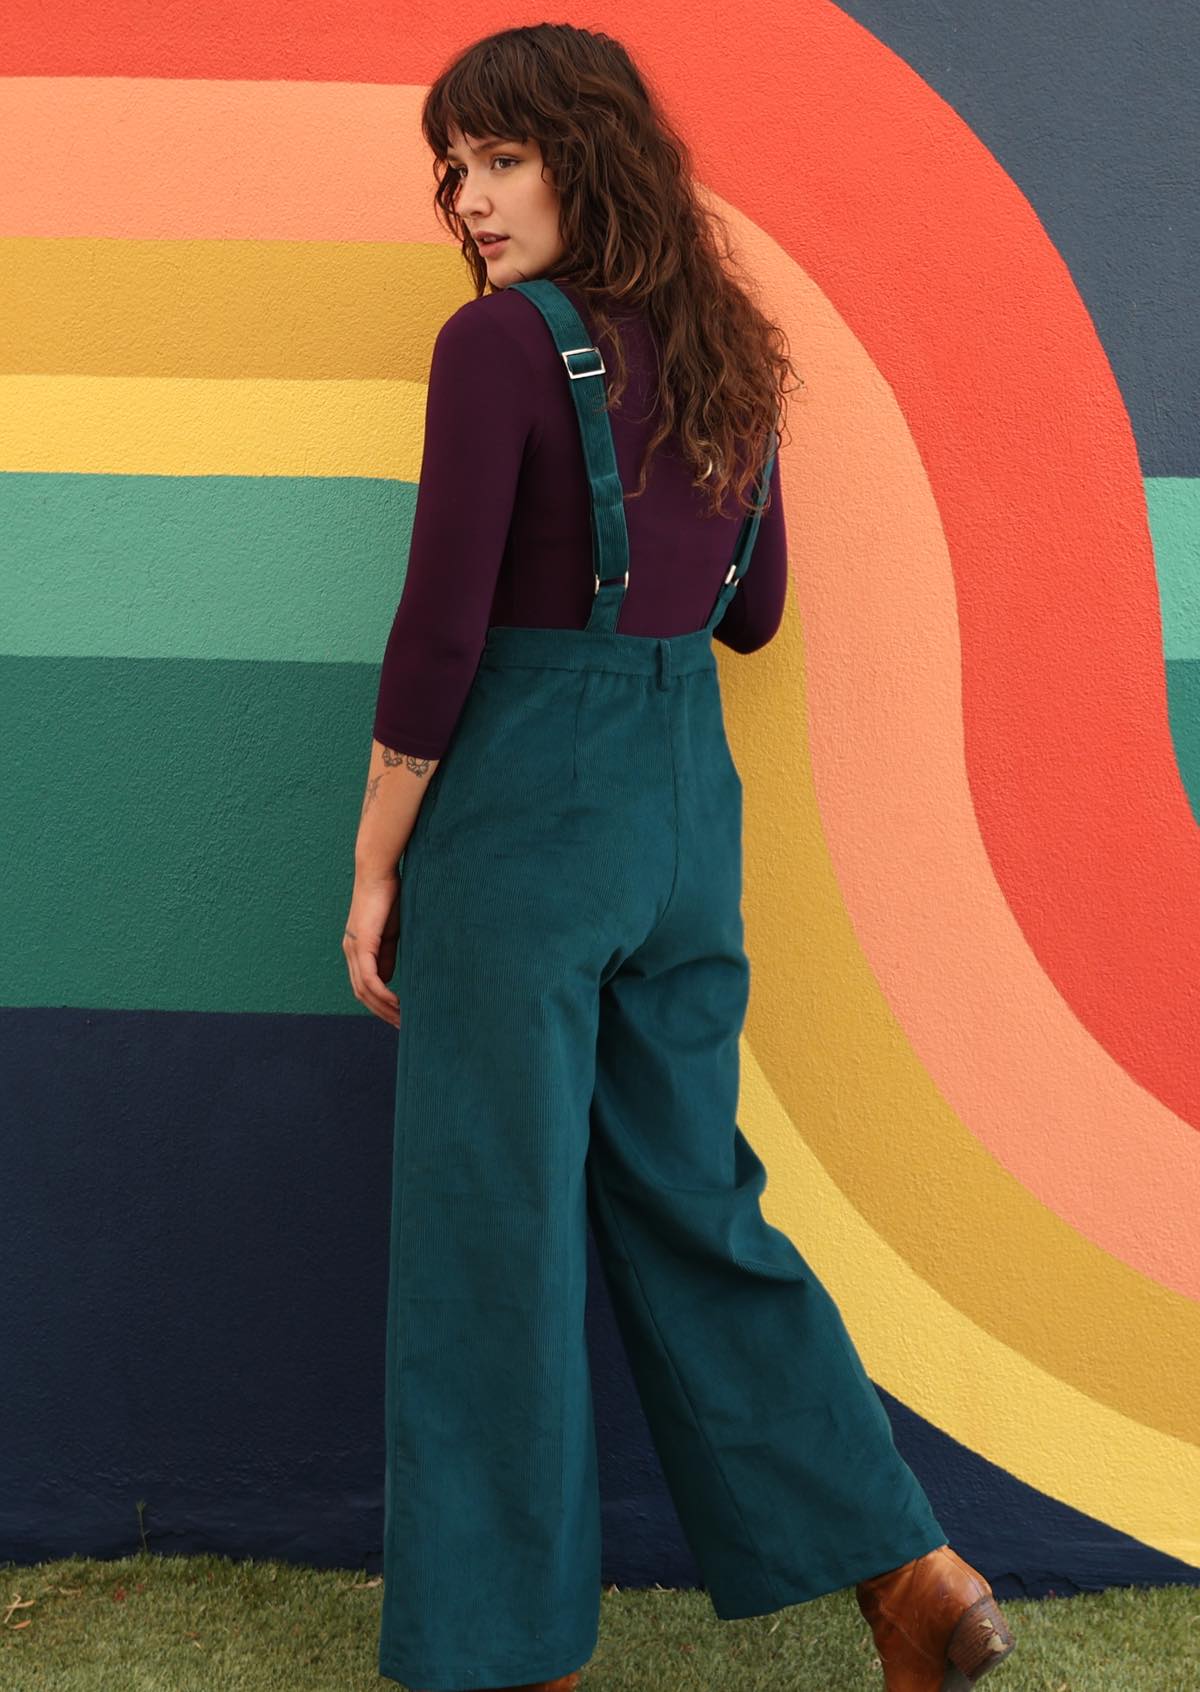 woman wearing dark teal cotton corduroy overalls over long sleeve purple top in front of bright mural  back view